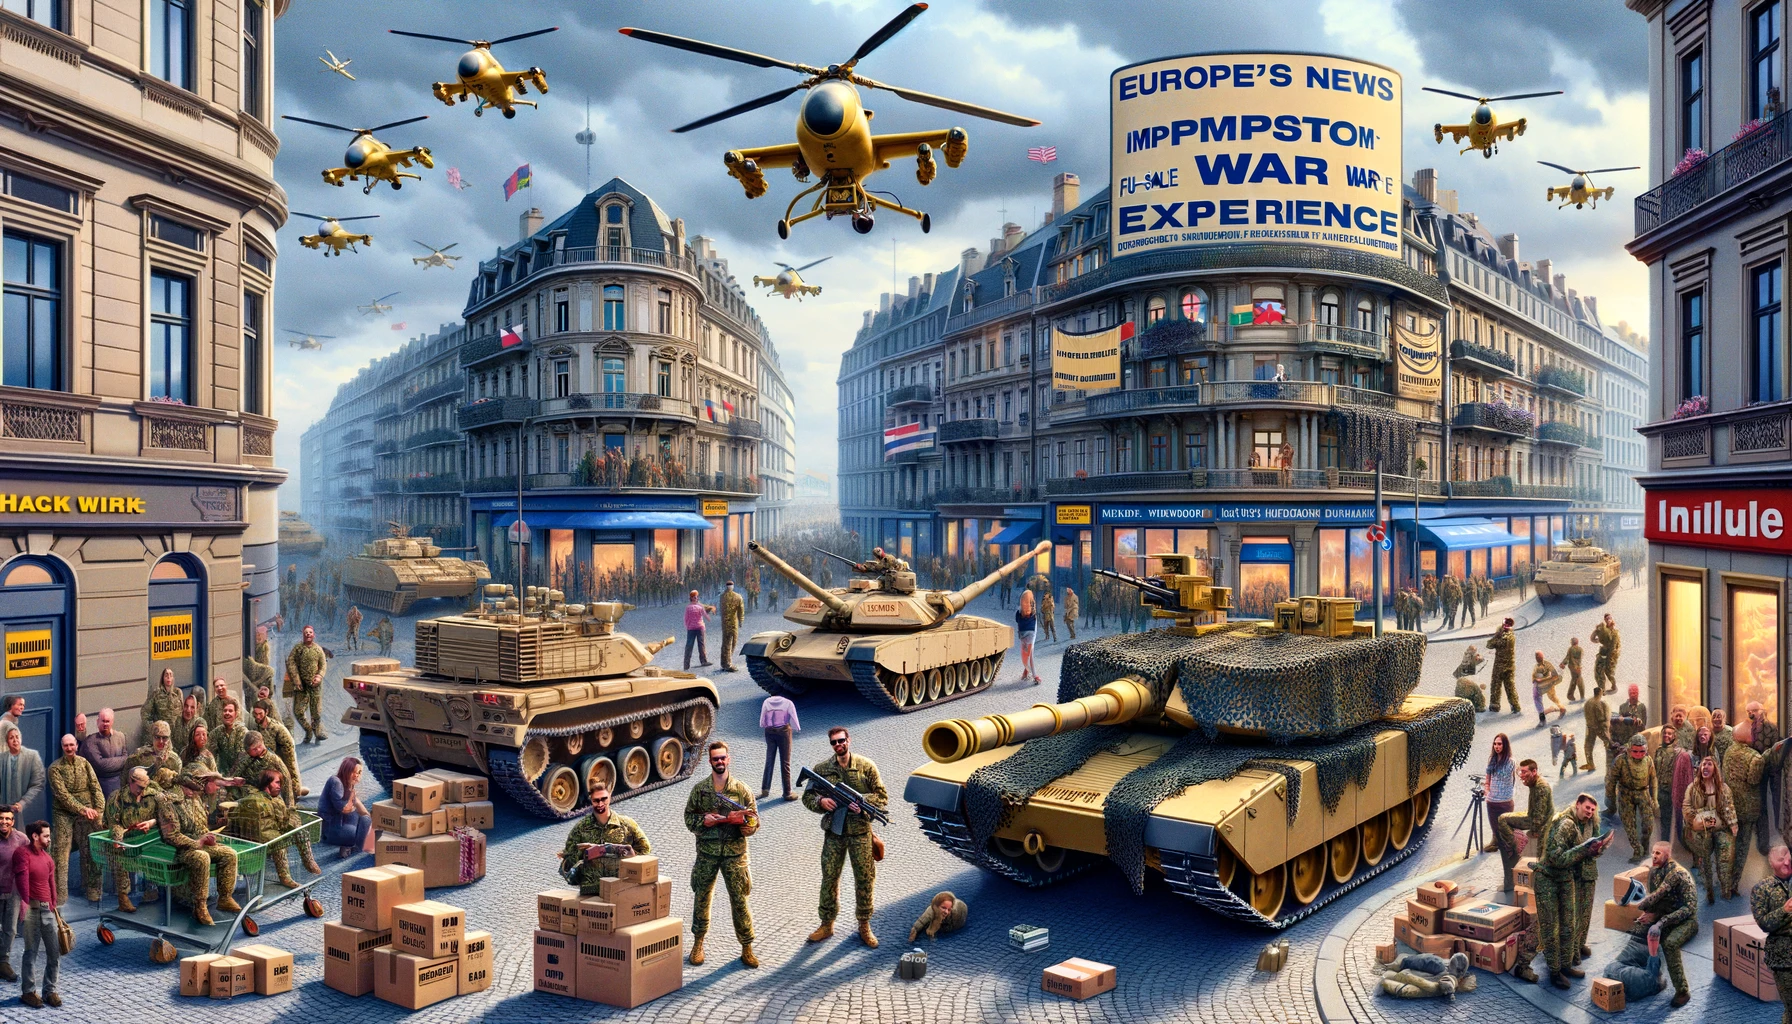 europe-imports-full-scale-war-experience-csdn